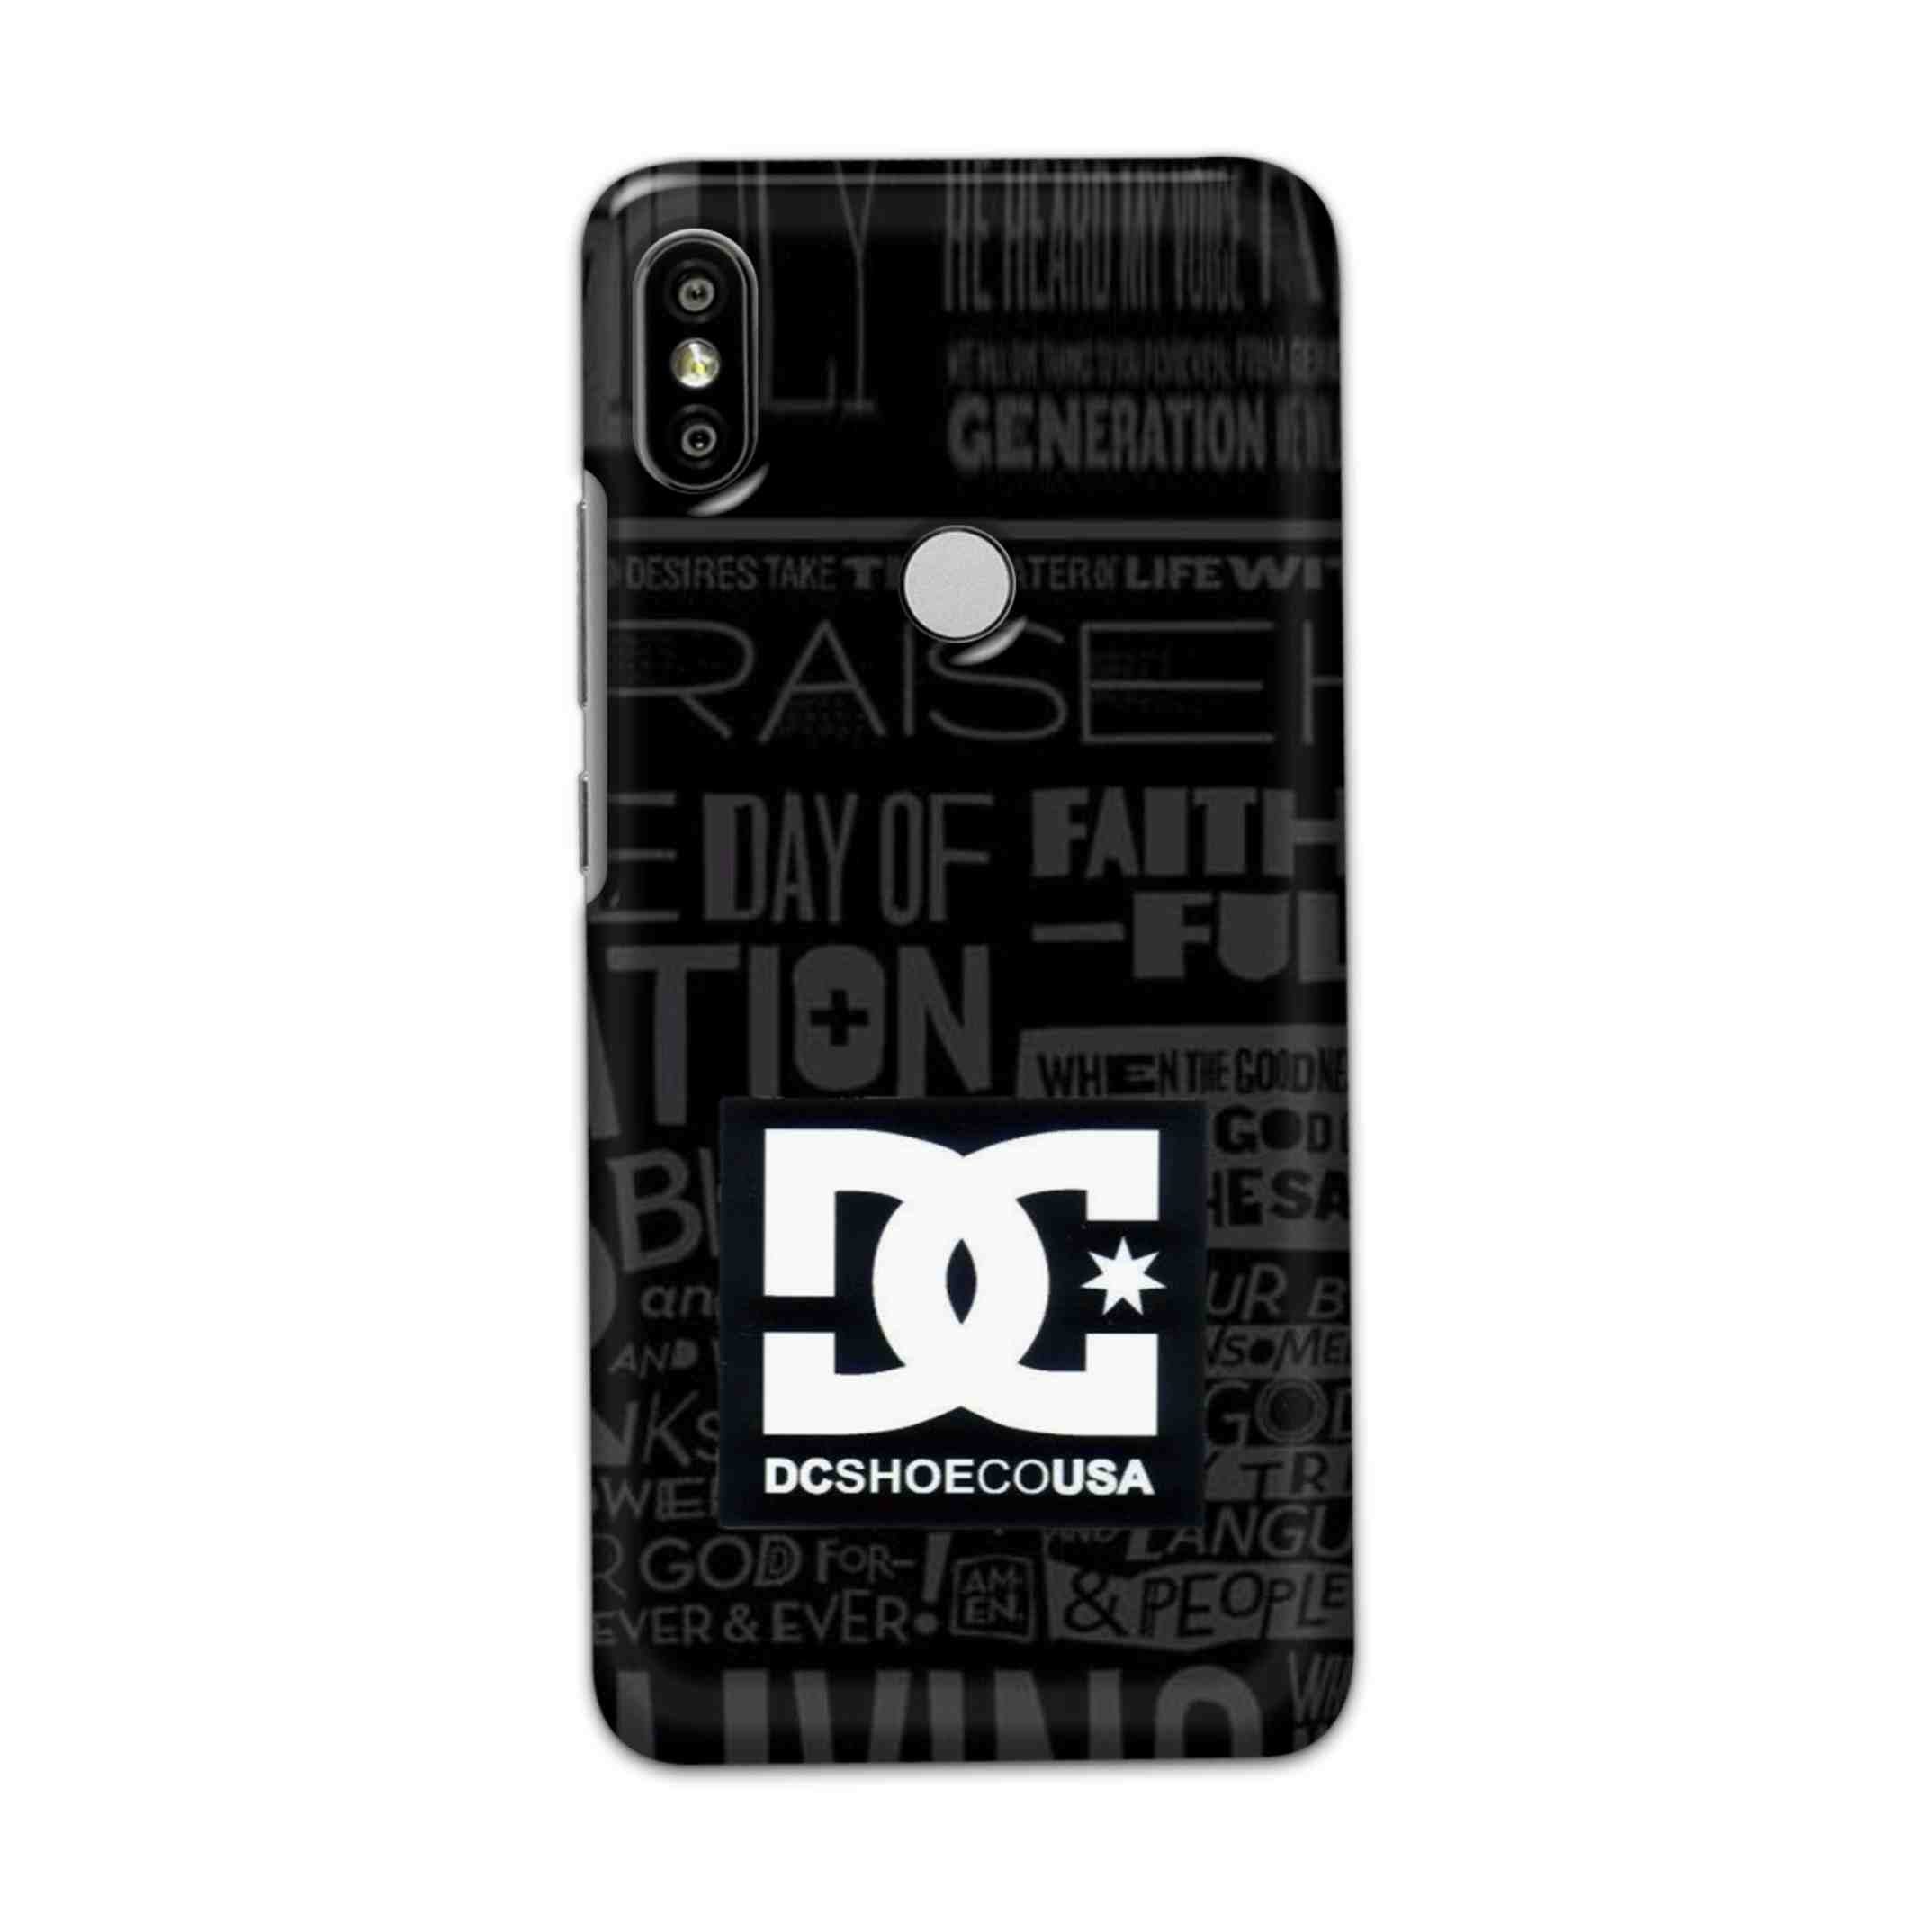 Buy Dc Shoecousa Hard Back Mobile Phone Case Cover For Redmi S2 / Y2 Online